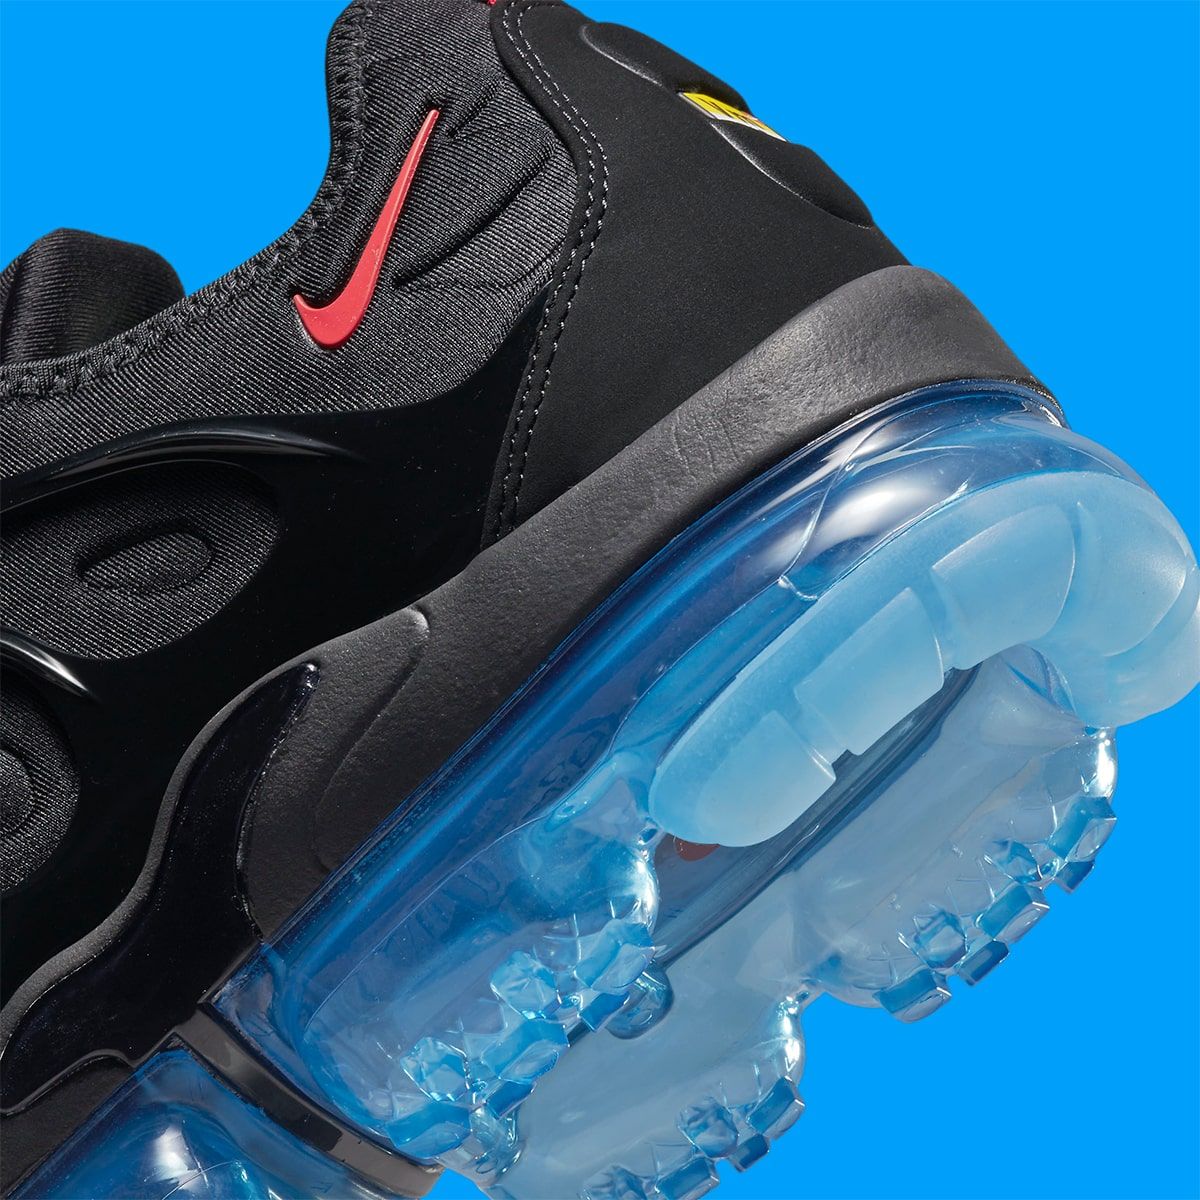 Nike VaporMax Plus Available Now in Black, Red and Blue | HOUSE OF HEAT